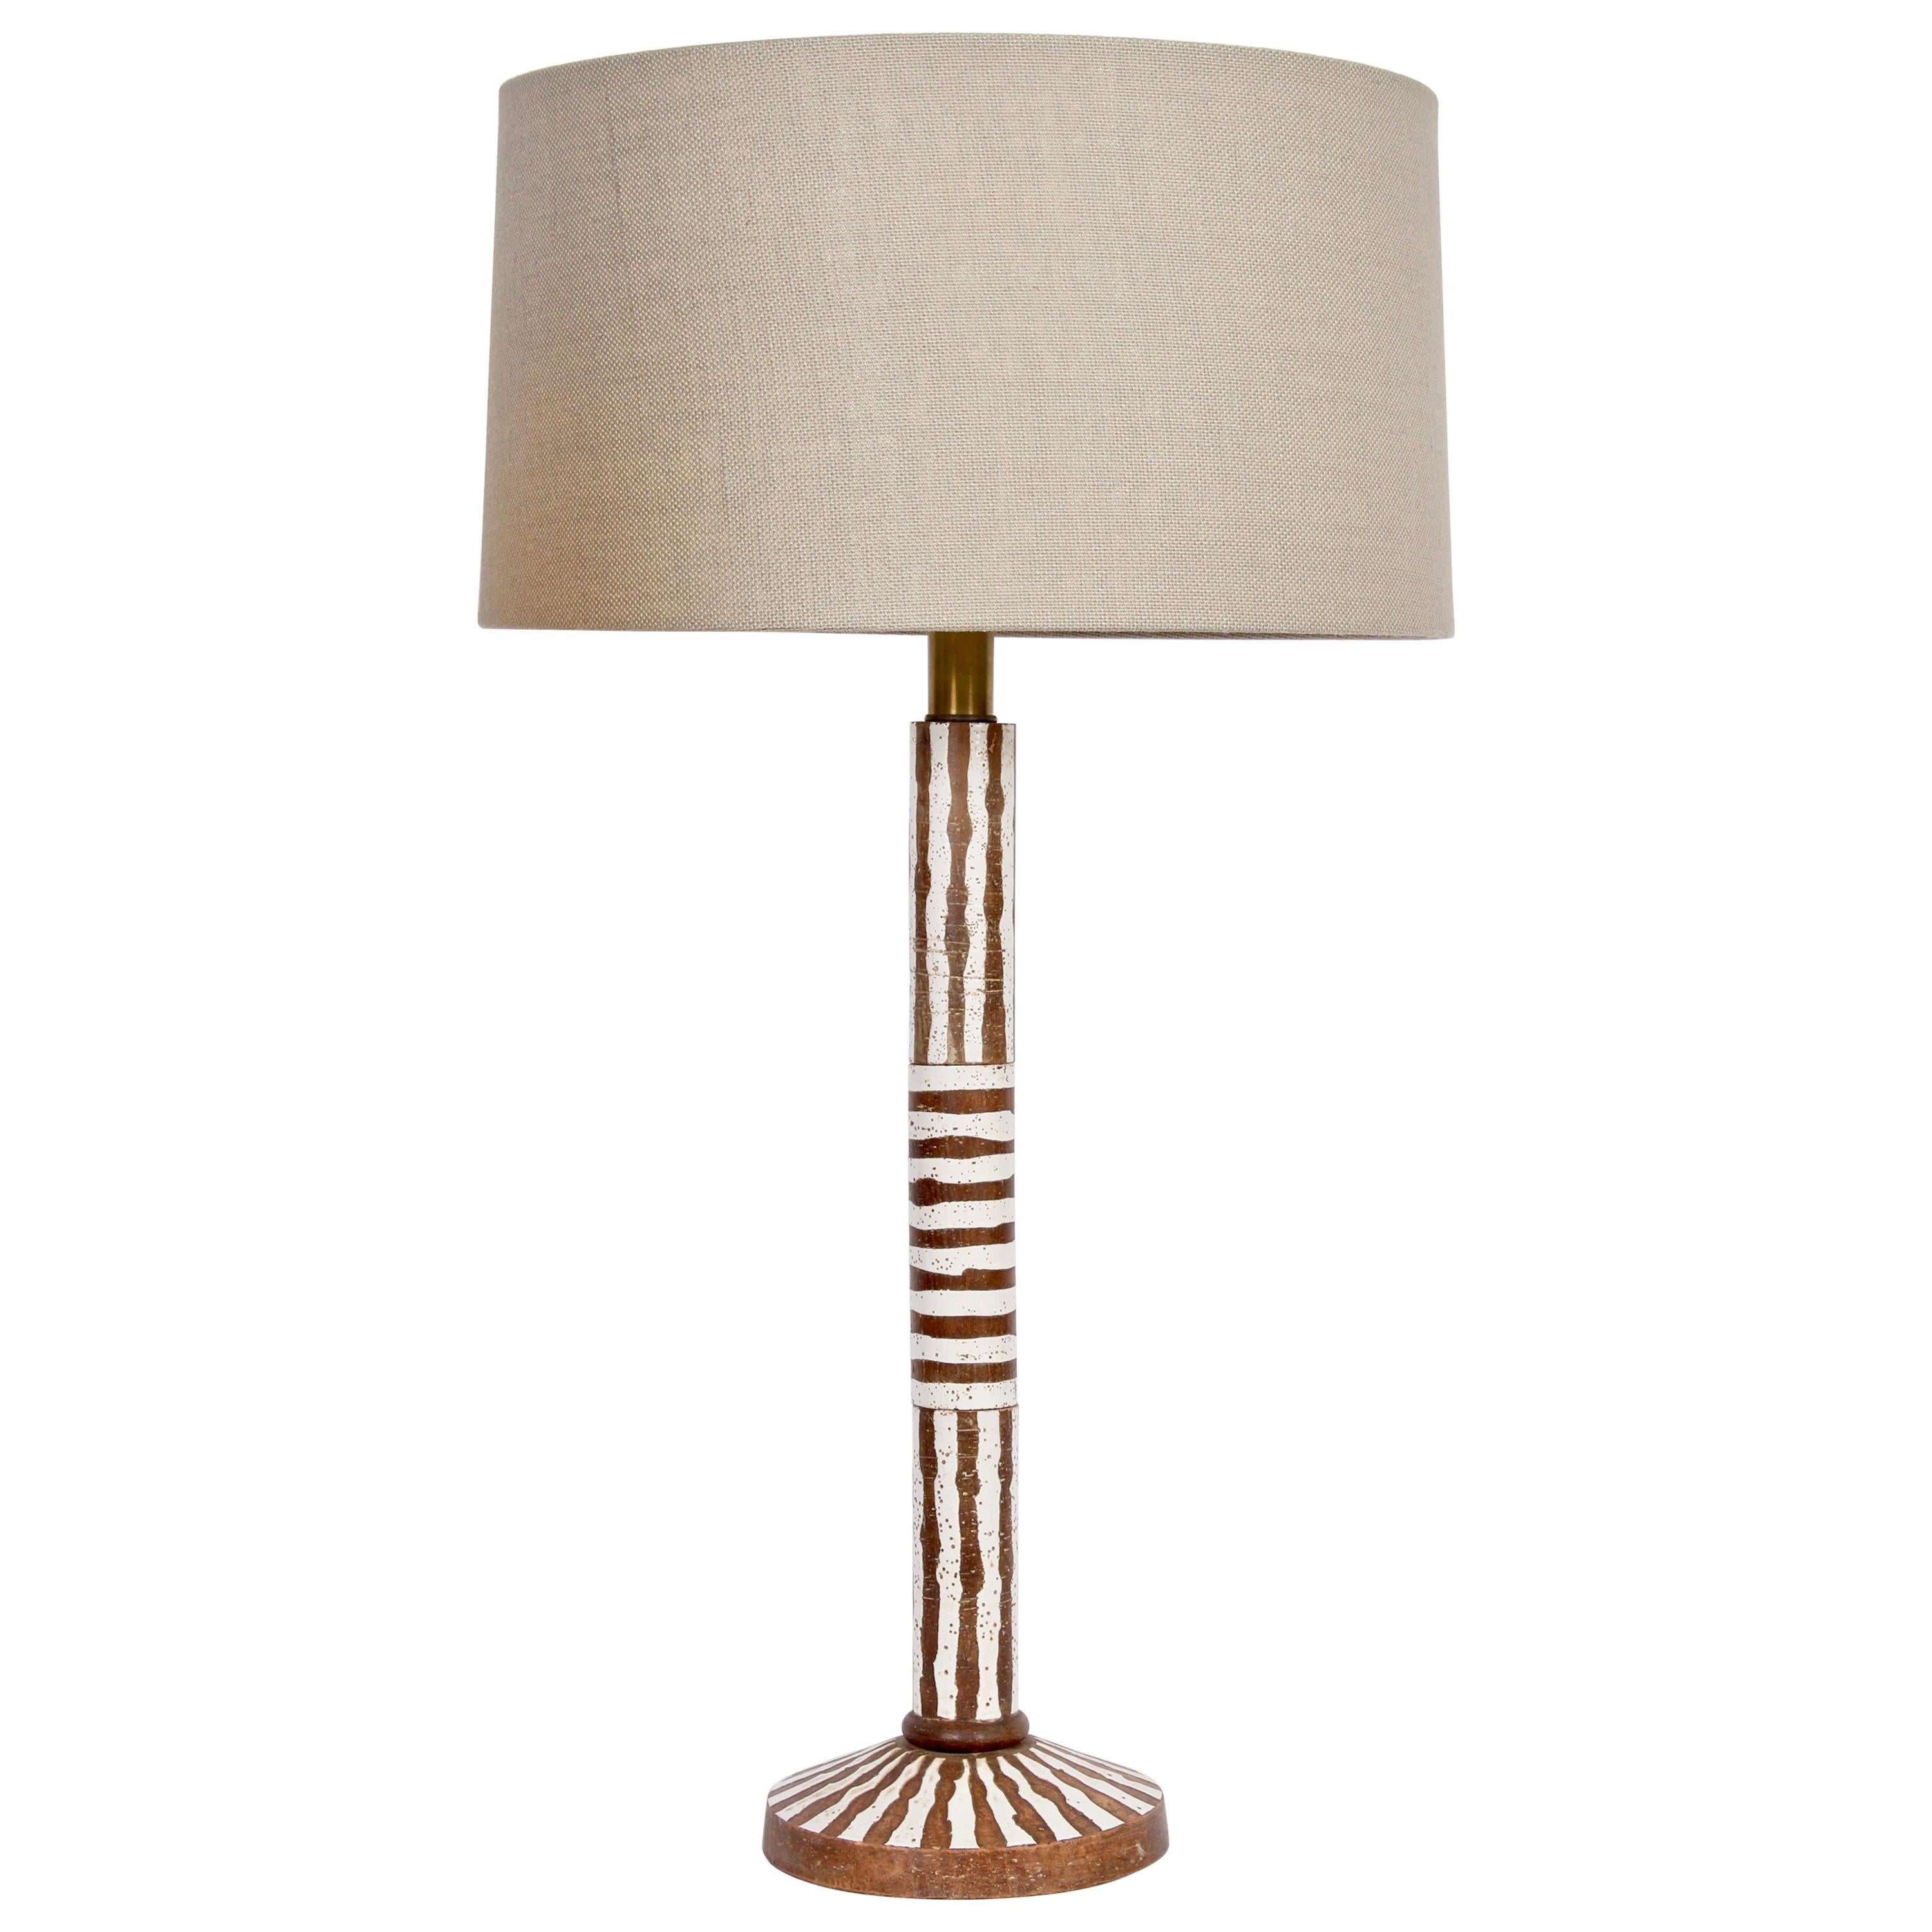 Tall Ugo Zaccagnini Hand Painted Brown and White Stripe Table Lamp, circa 1960